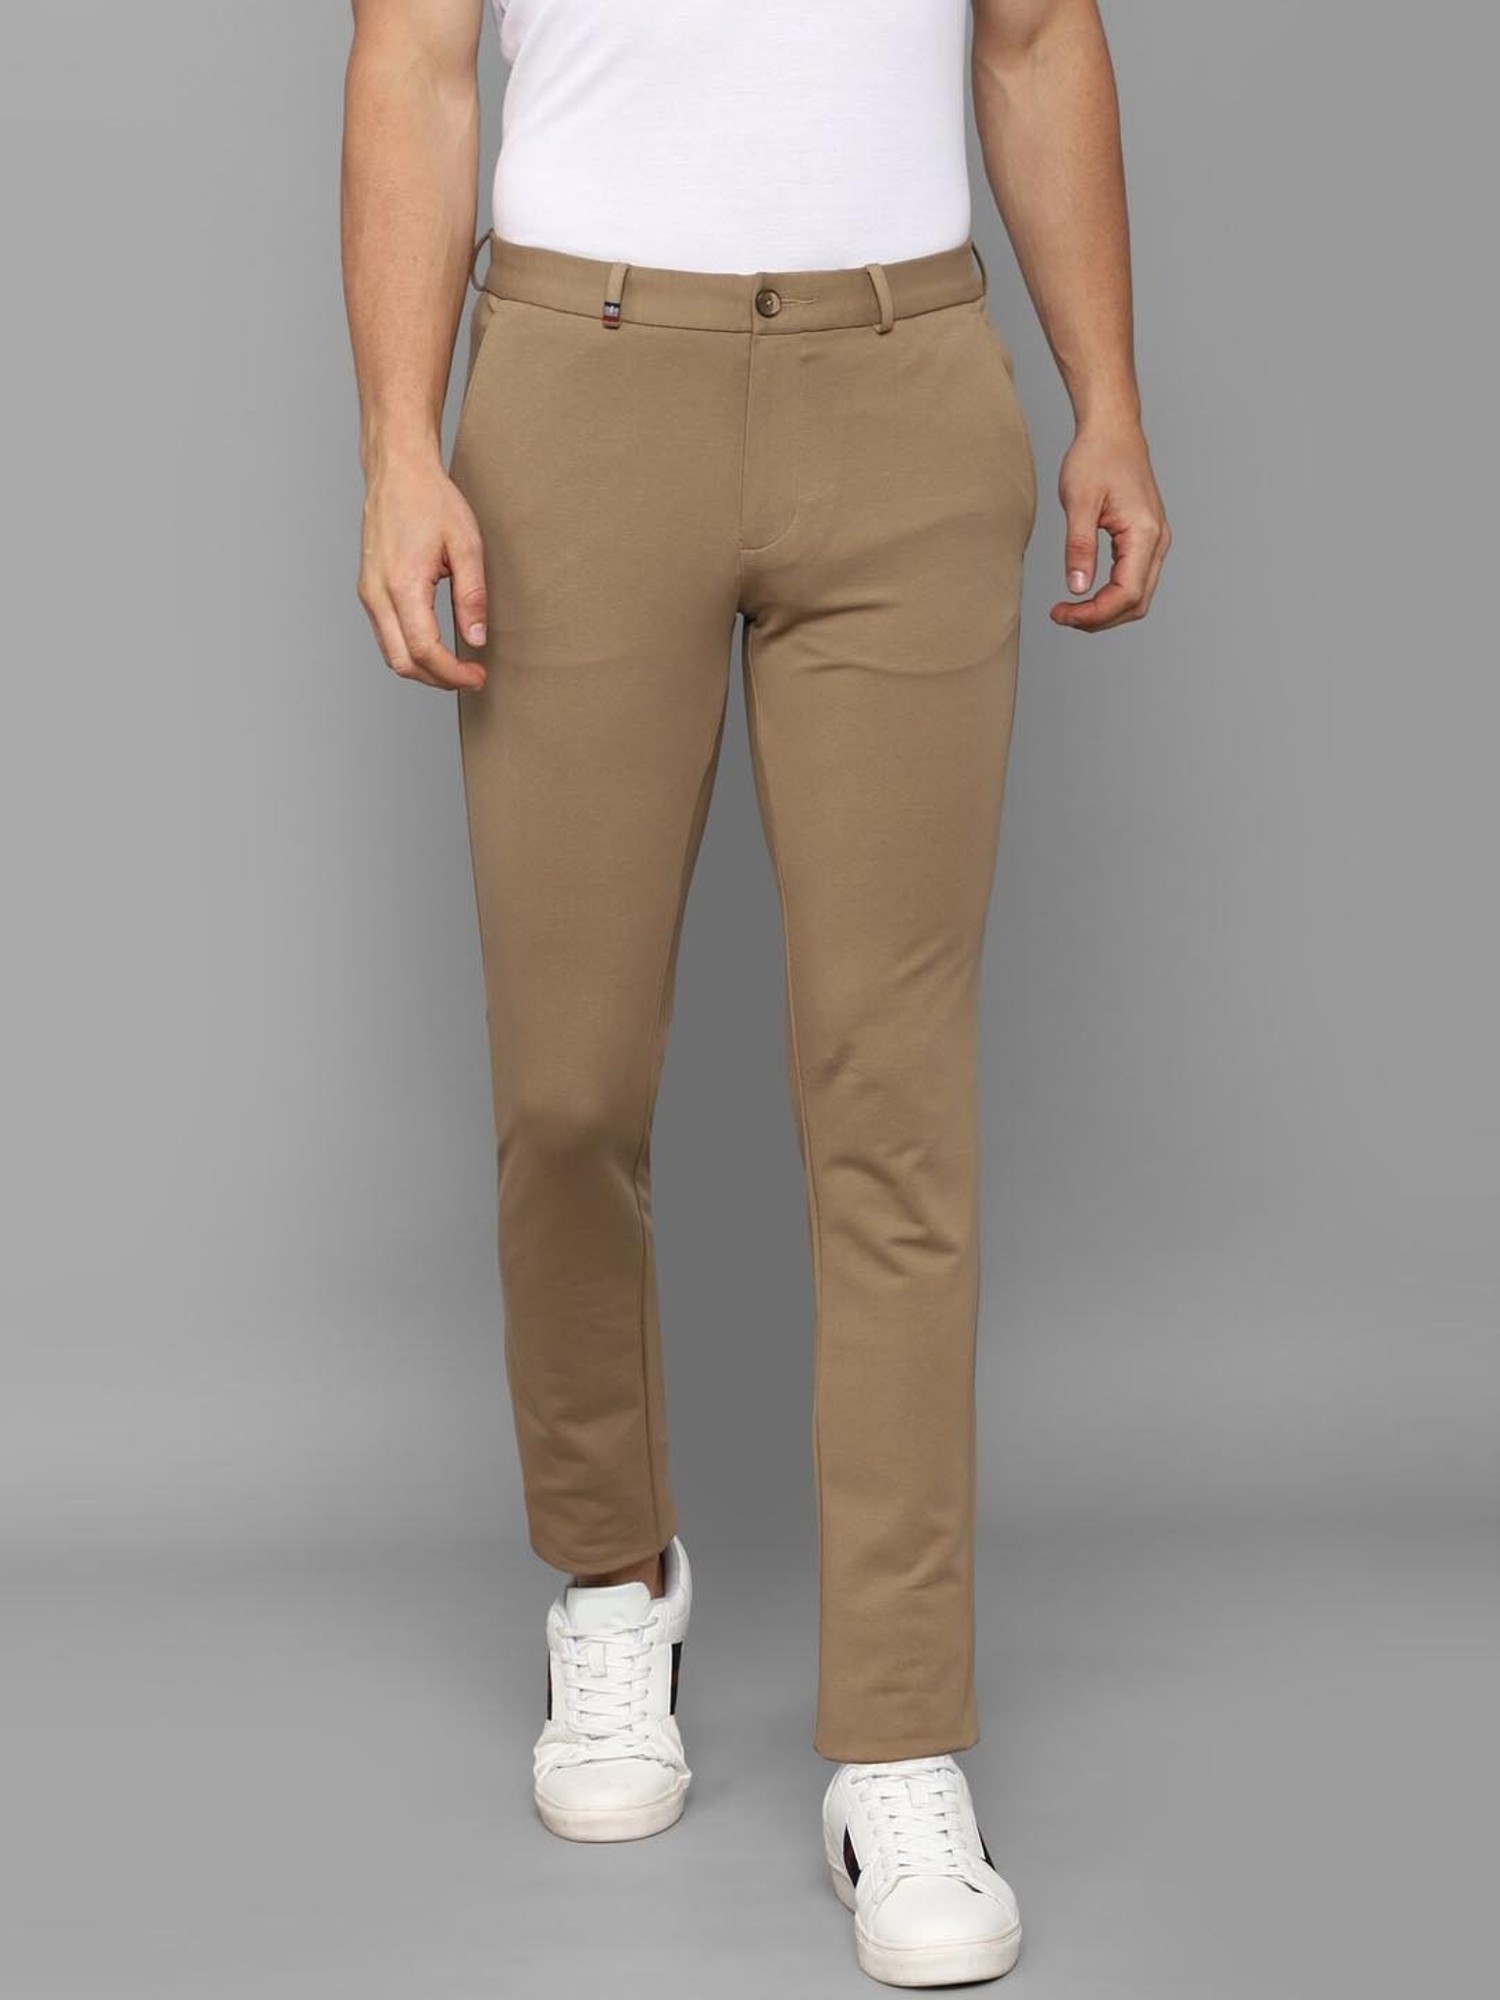 Louis Philippe Formal Trousers  Buy Louis Philippe Beige Trousers Online   Nykaa Fashion